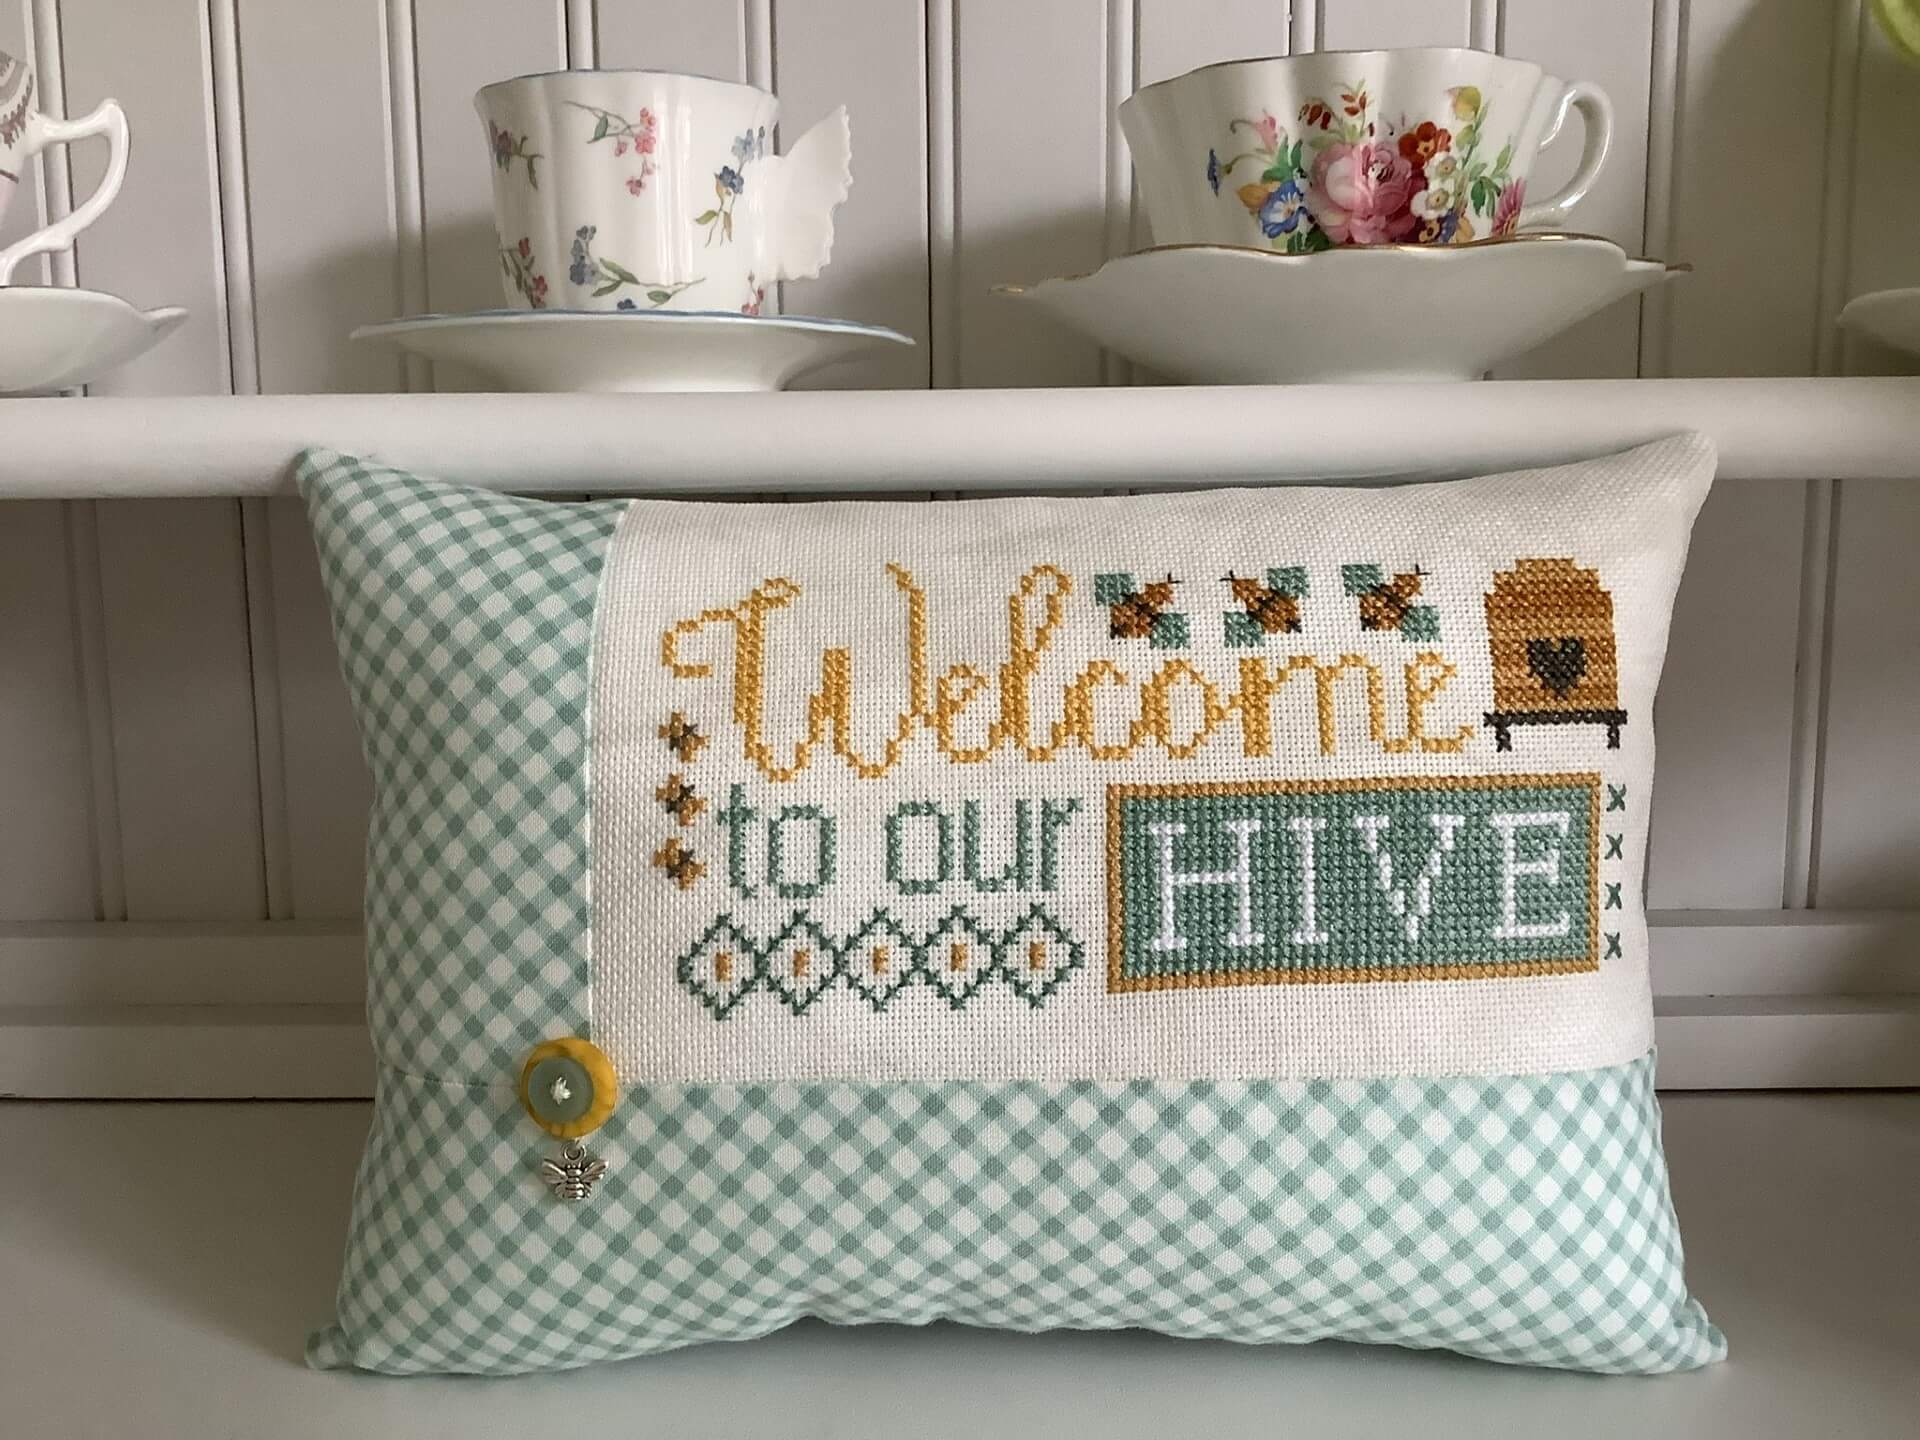 "Welcome to our Hive" cross stitch cushion